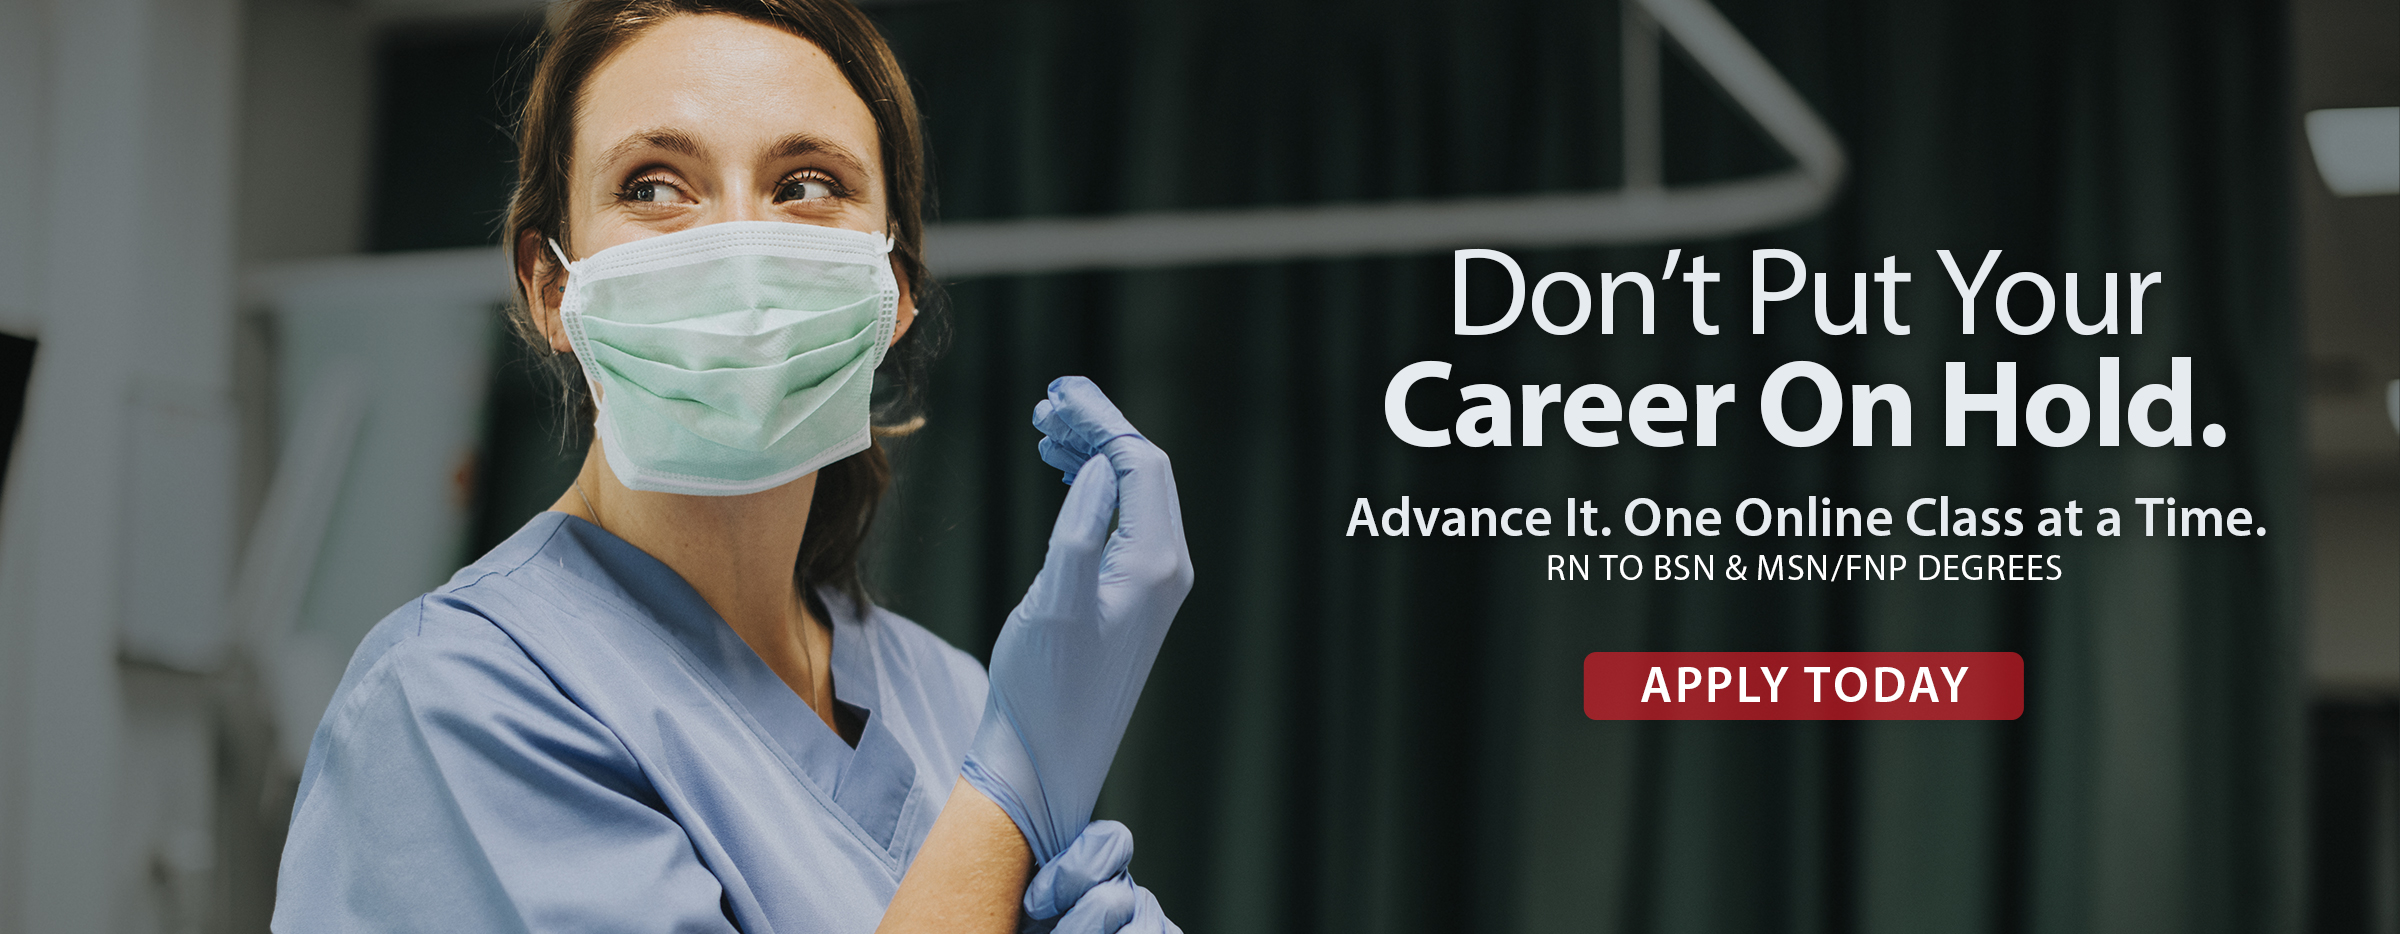 Image of Nurse. Don't put your career on hold. Advance it. One online class at a time. RN to BSN & MSN to FNP Degrees. Apply to KCU Nursing Programs Today.